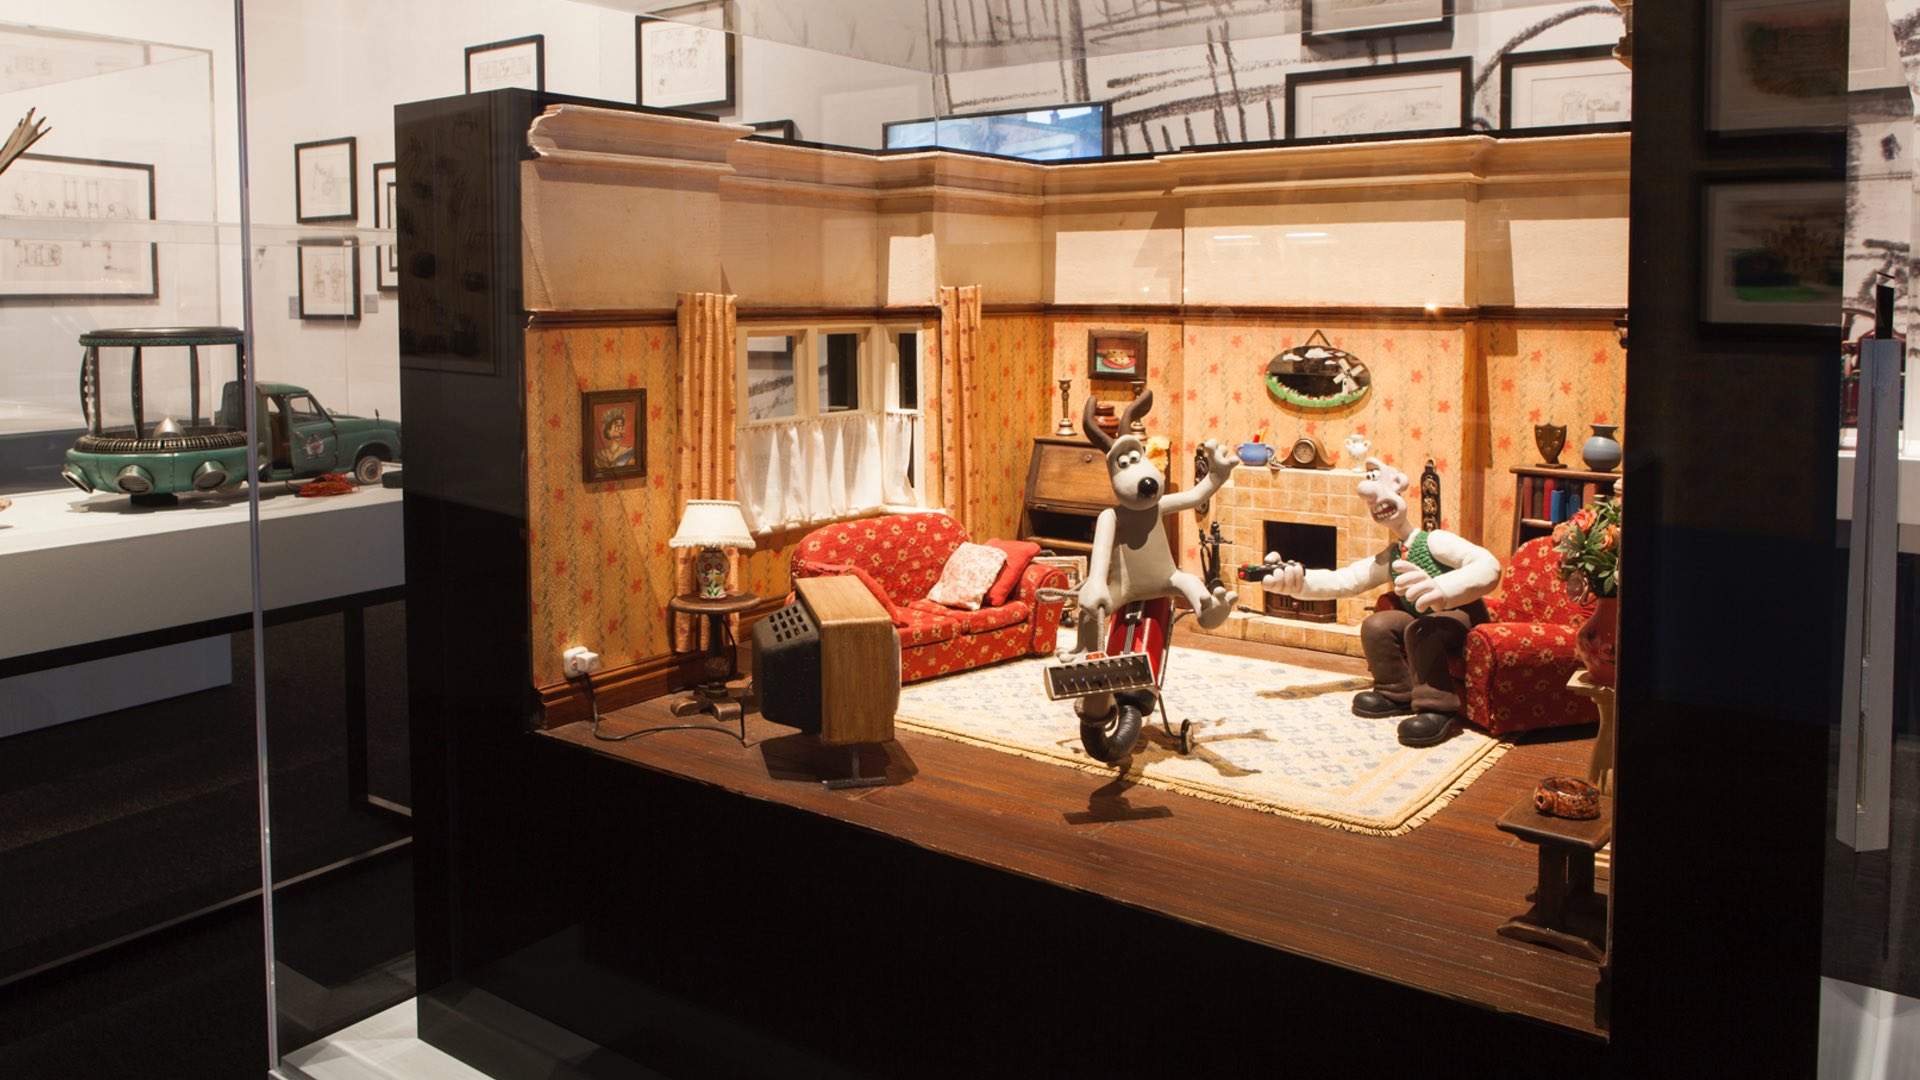 A Look Inside ACMI's Cracking New Wallace & Gromit Exhibition